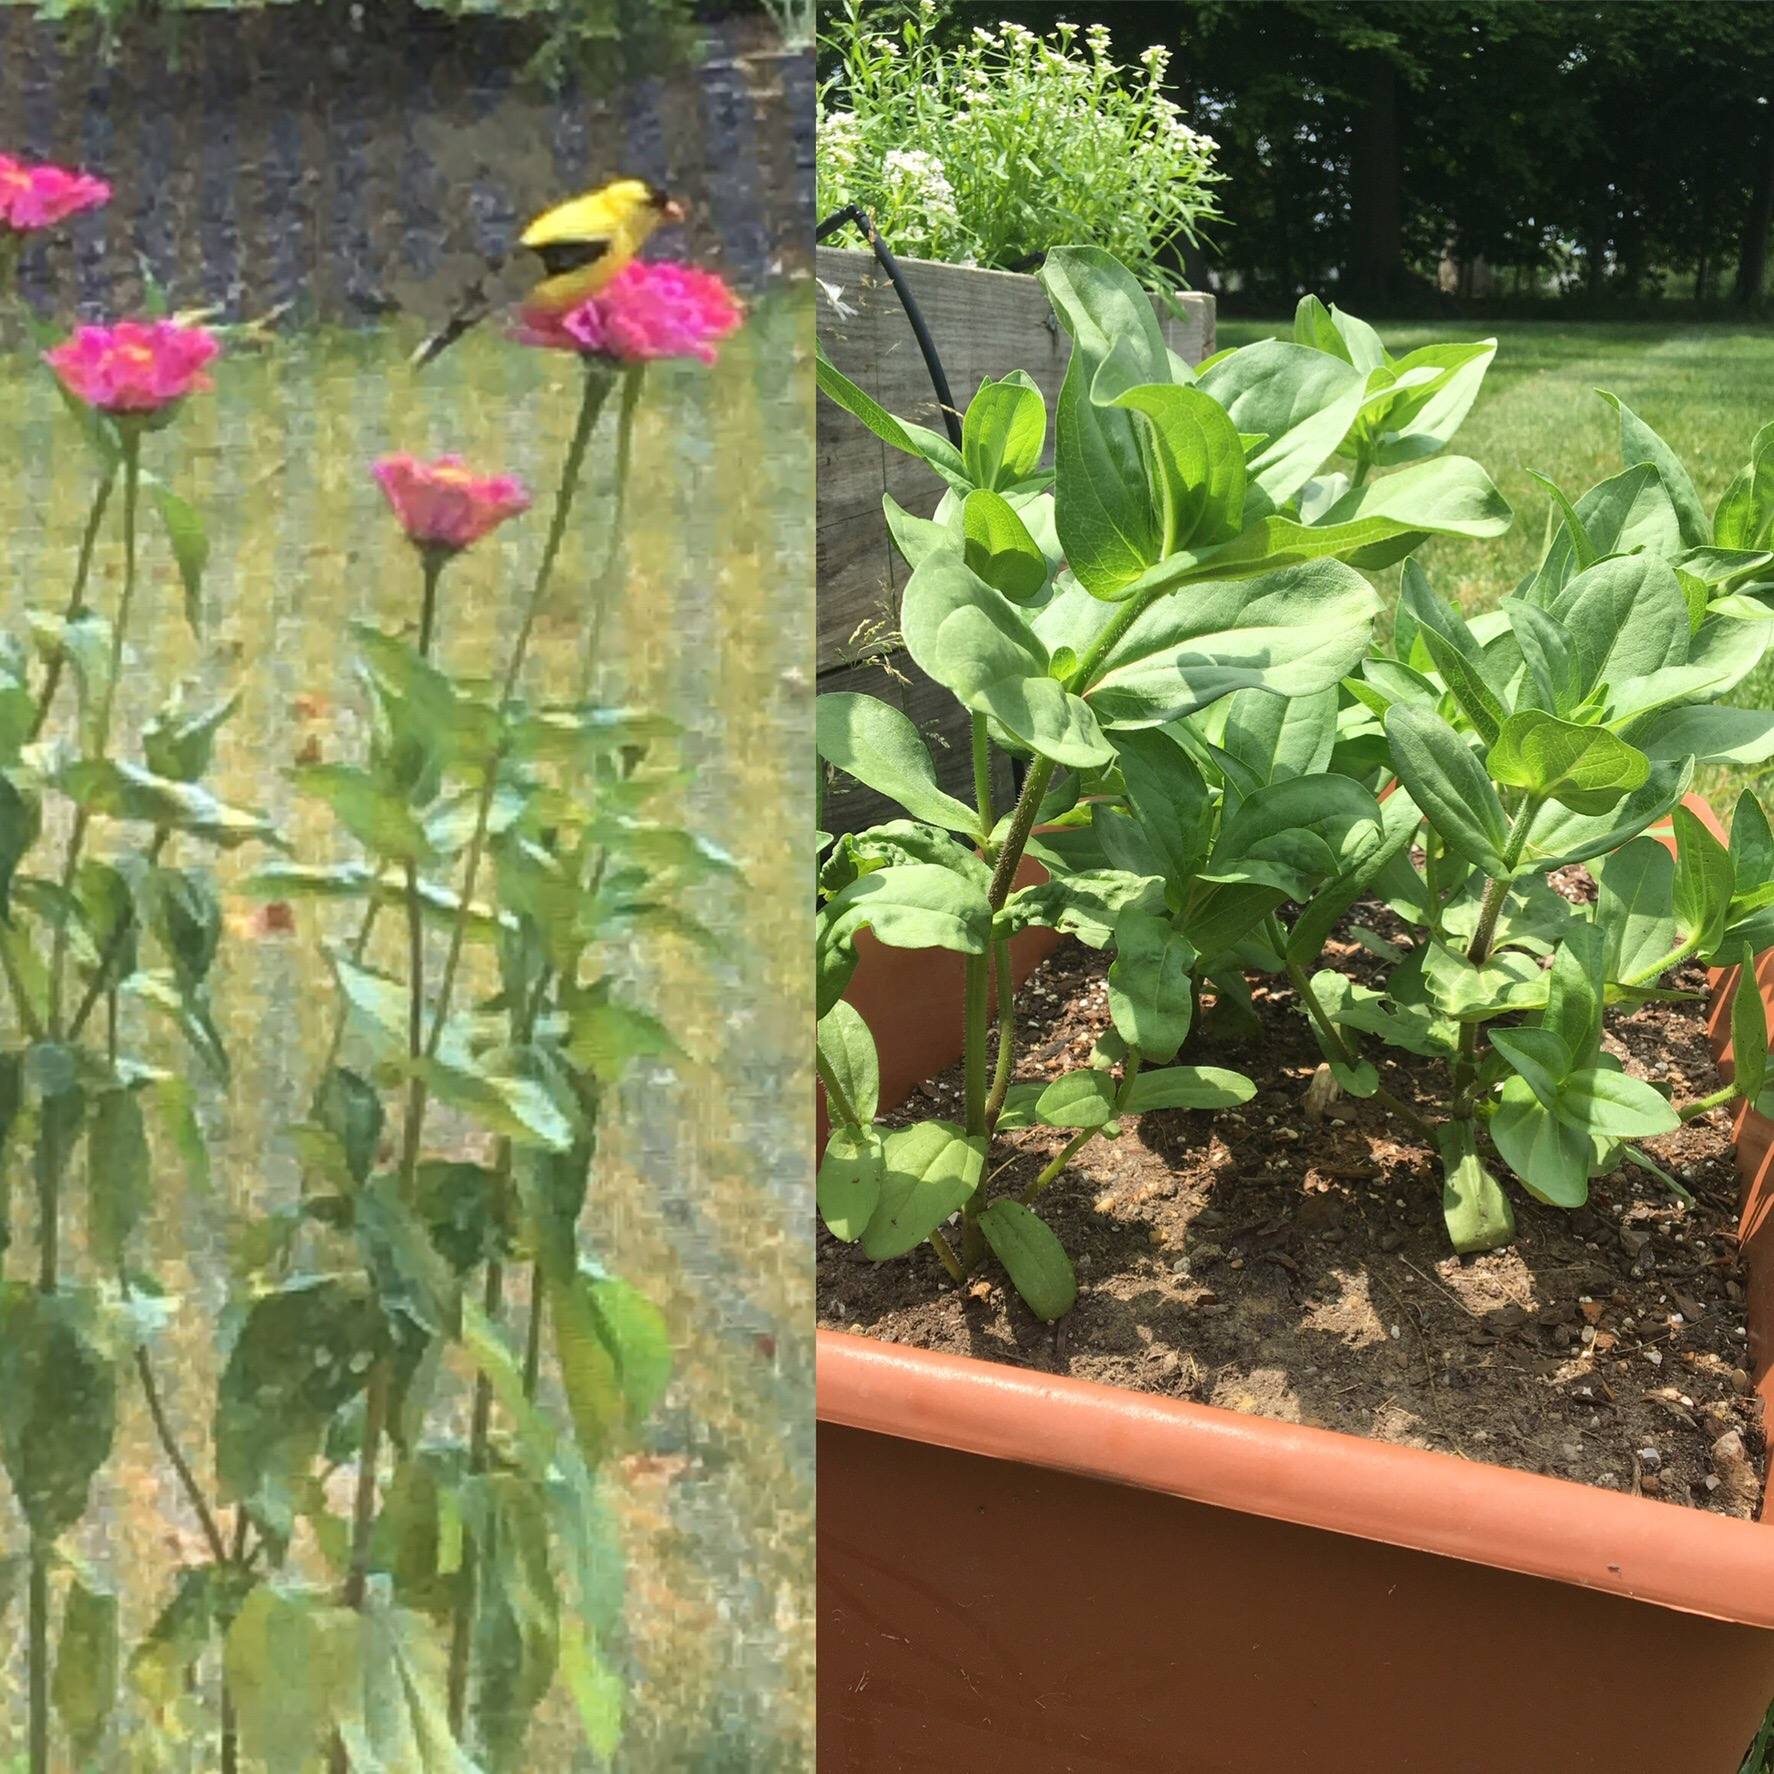 Zinnias unpinched (left) and pinched (right)